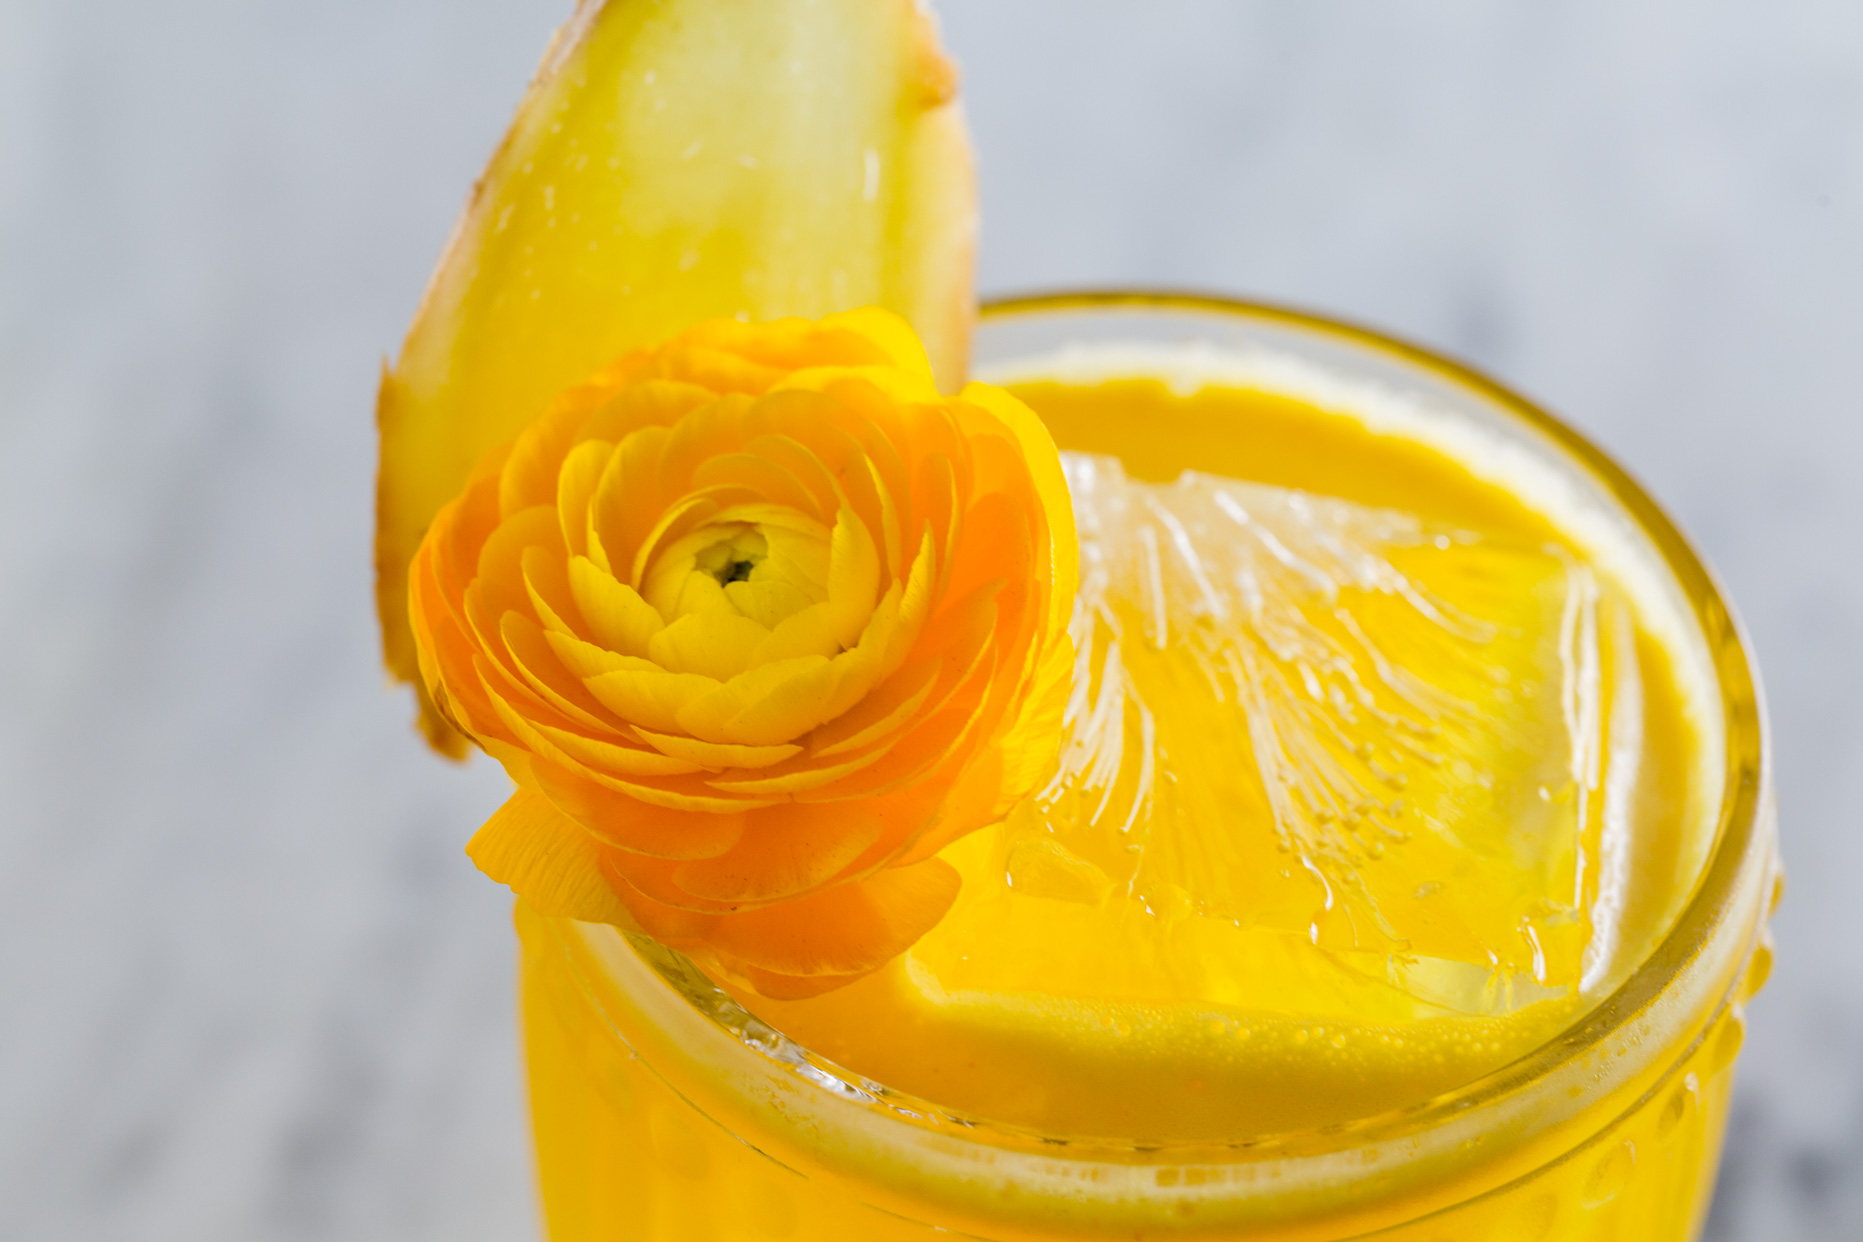 Yellow drink with a yellow flower adorning it